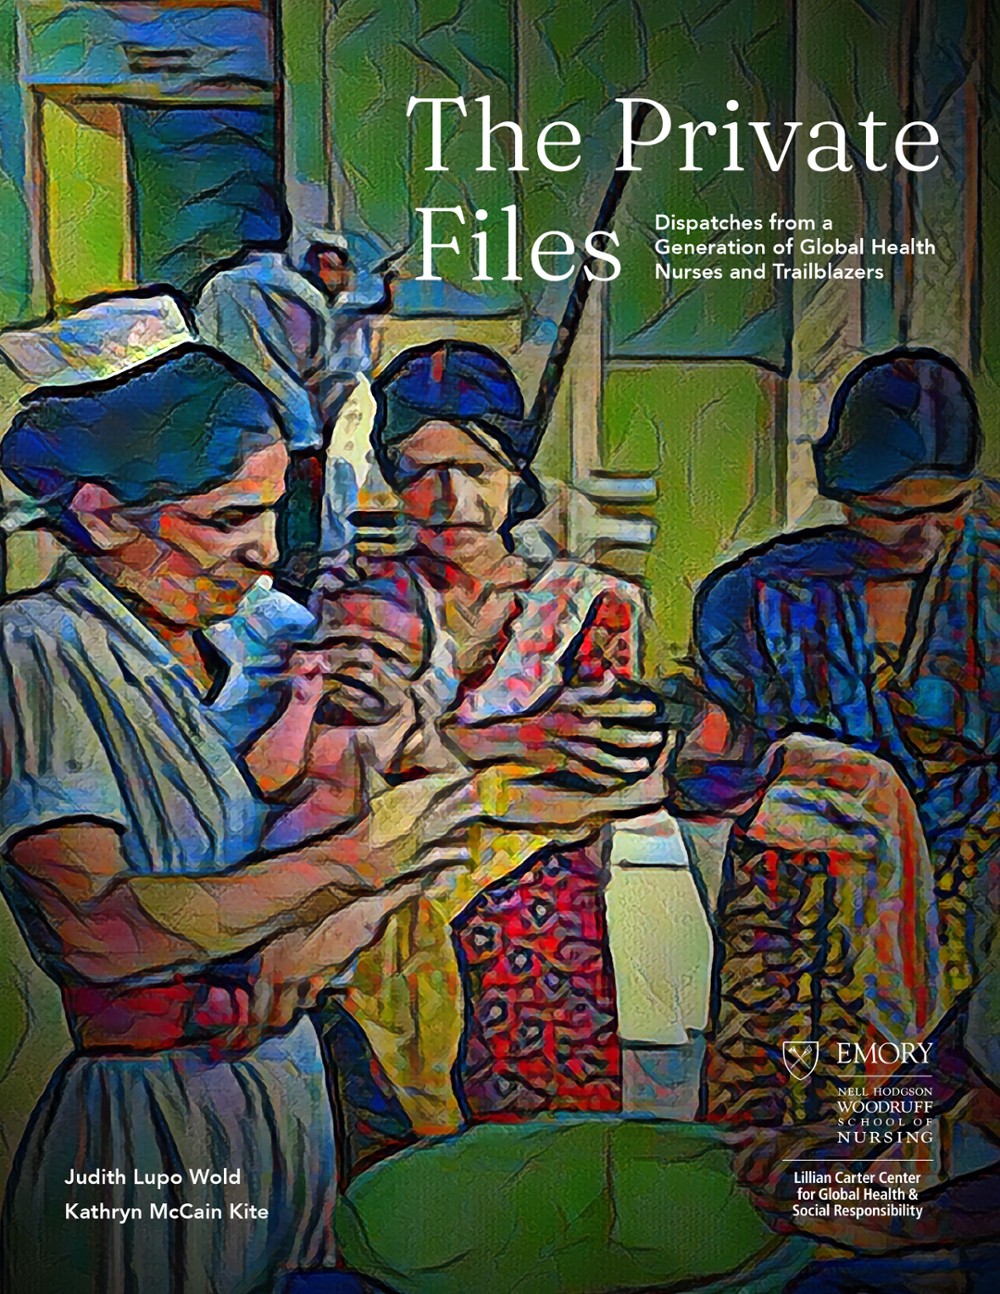 The Private Files: Dispatches from a Generation of Global Health Nurses and Trailblazers